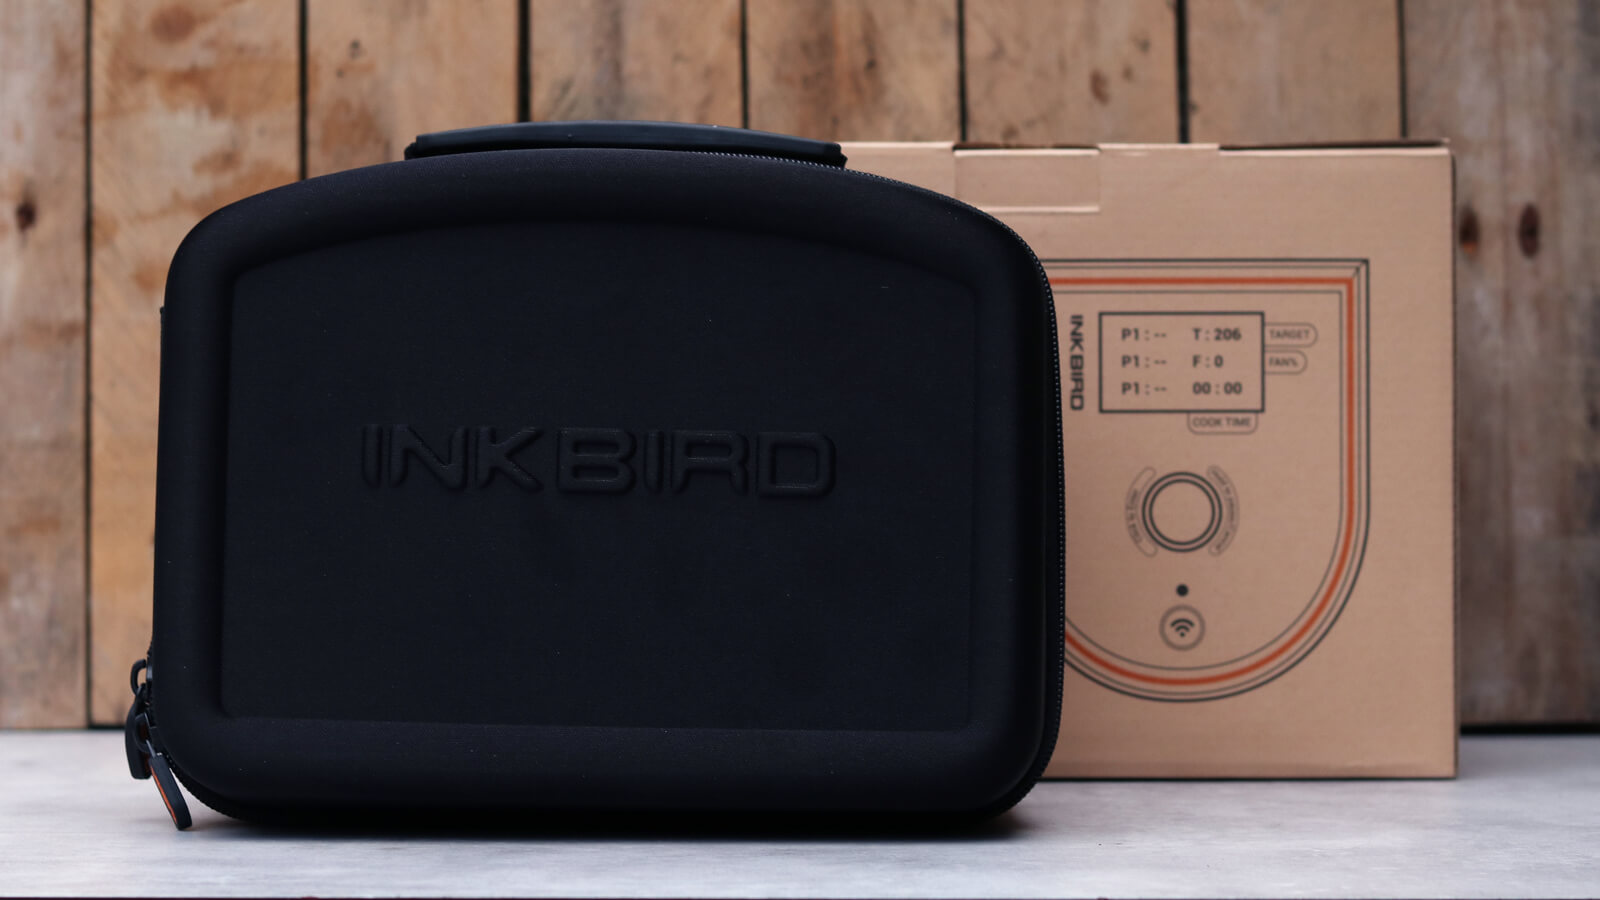 Review Inkbird ISC-007 BW BBQ Controller